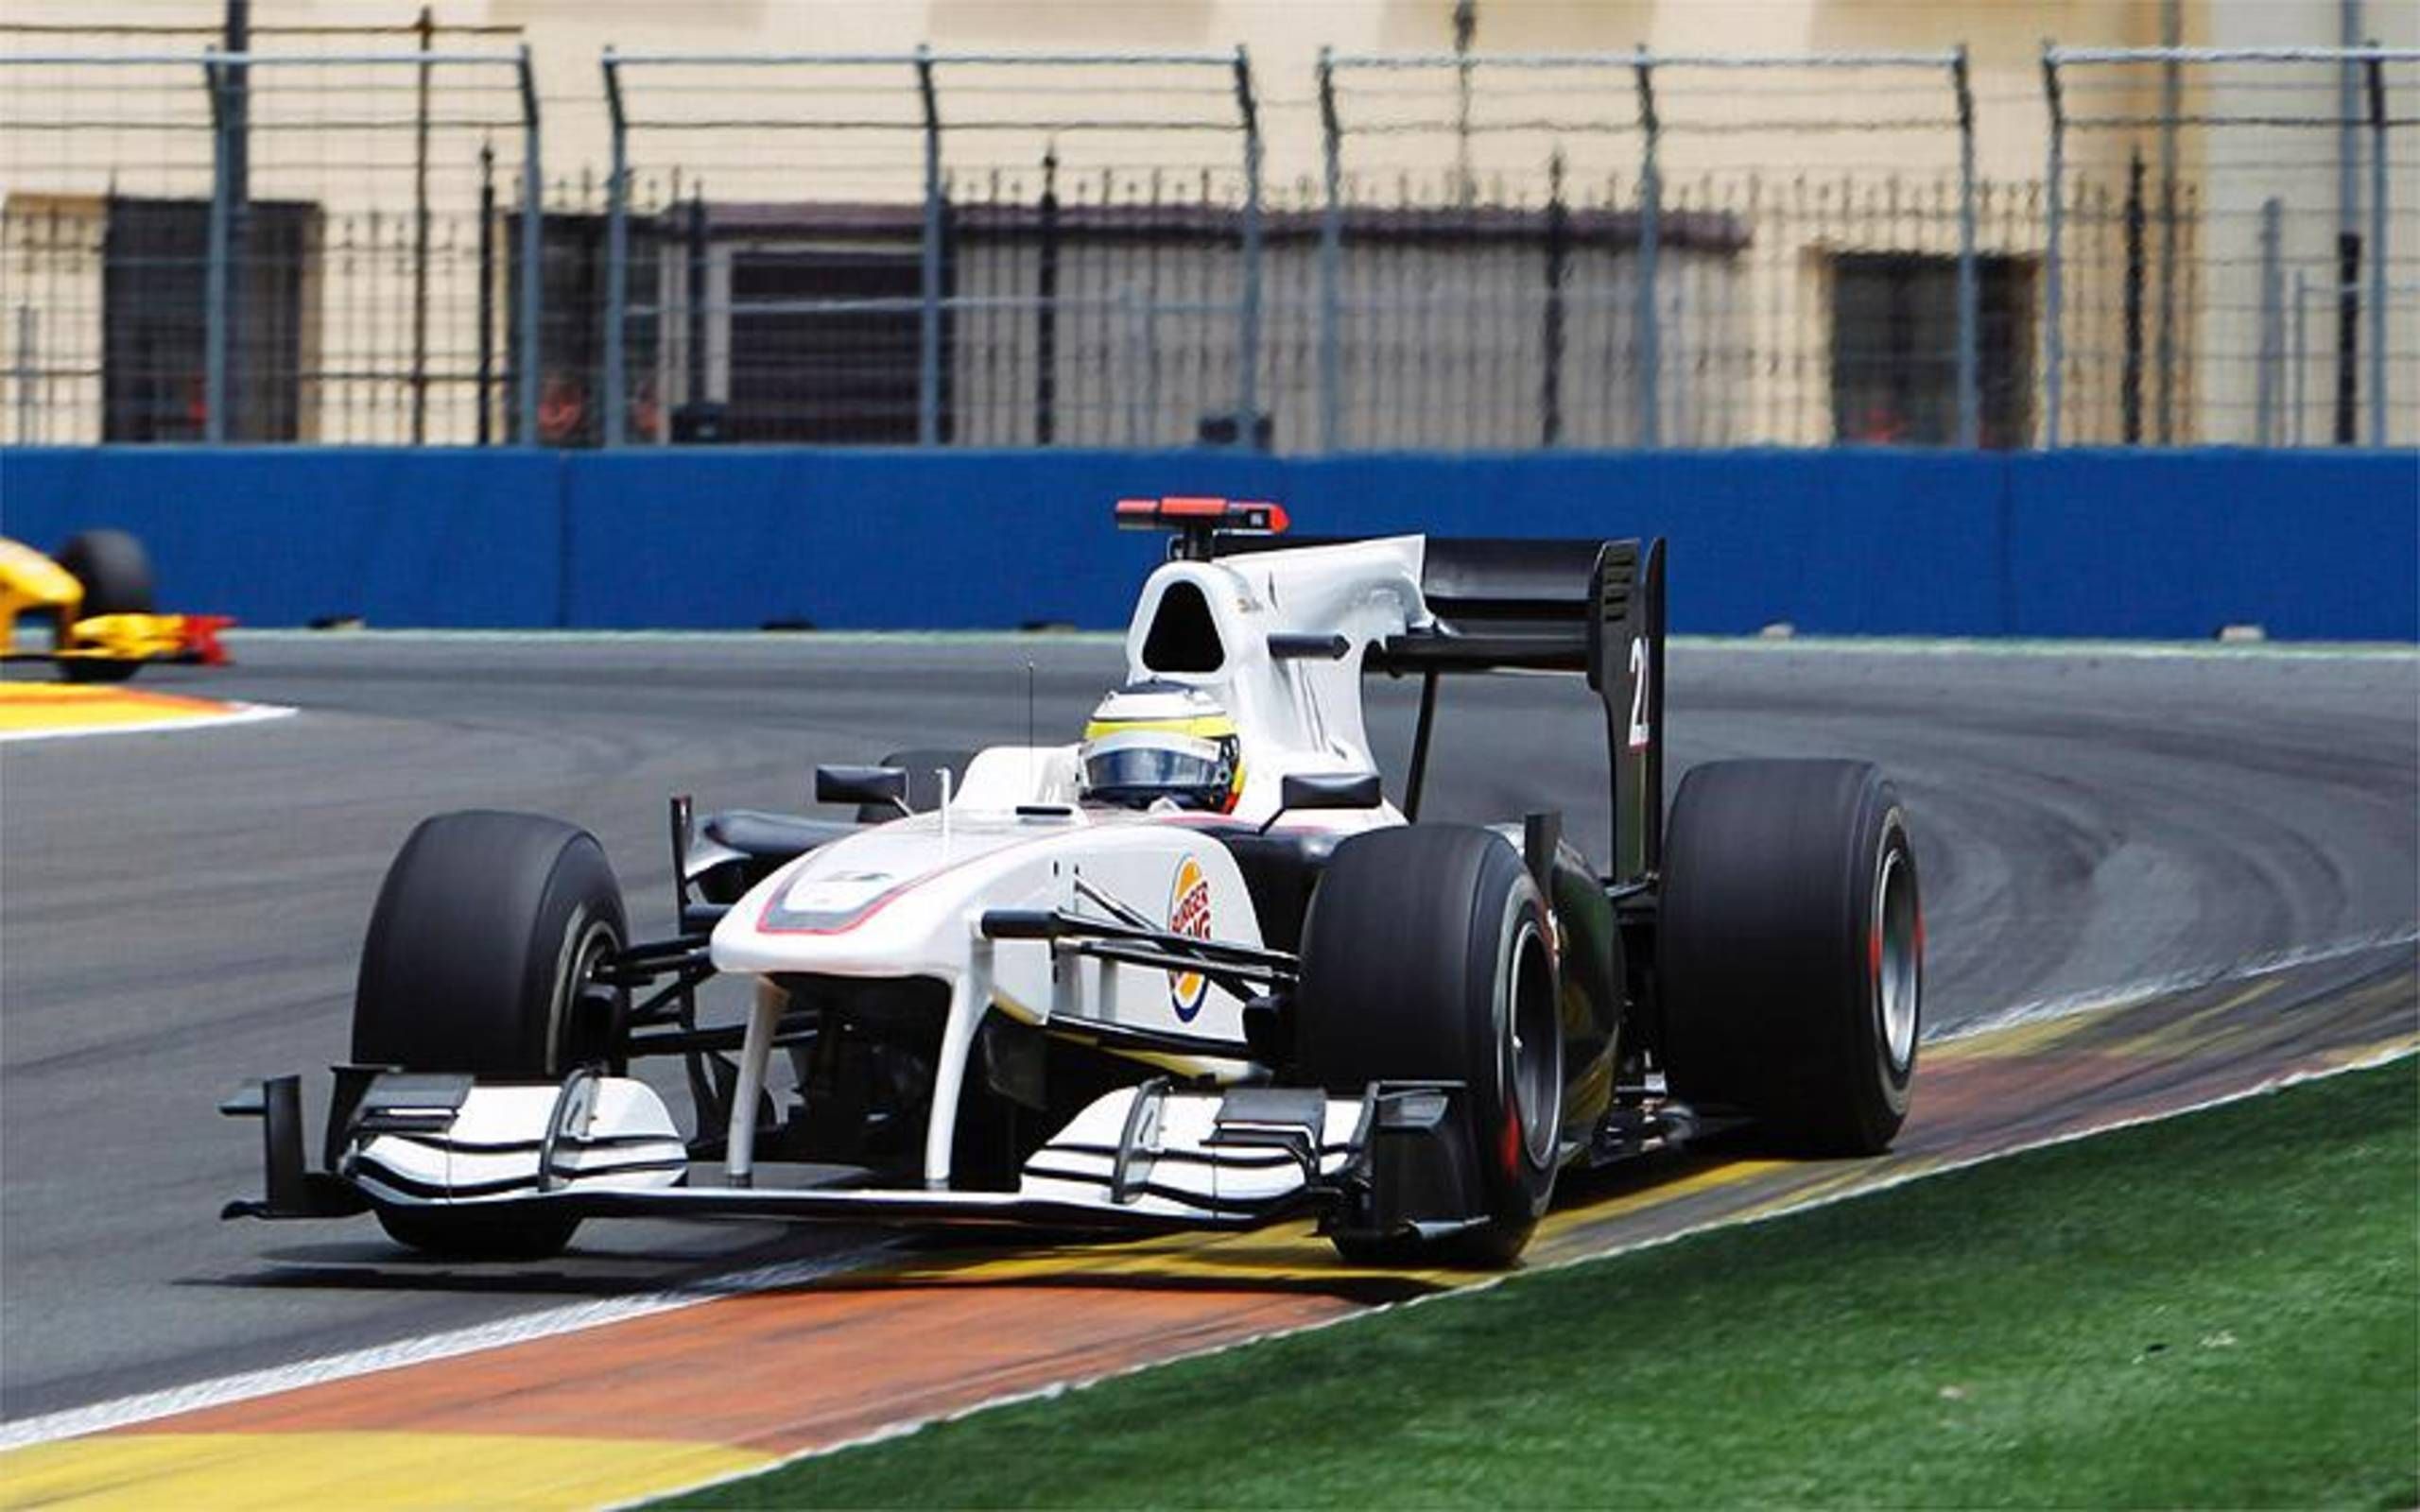 Sauber to drop BMW from F1 team name